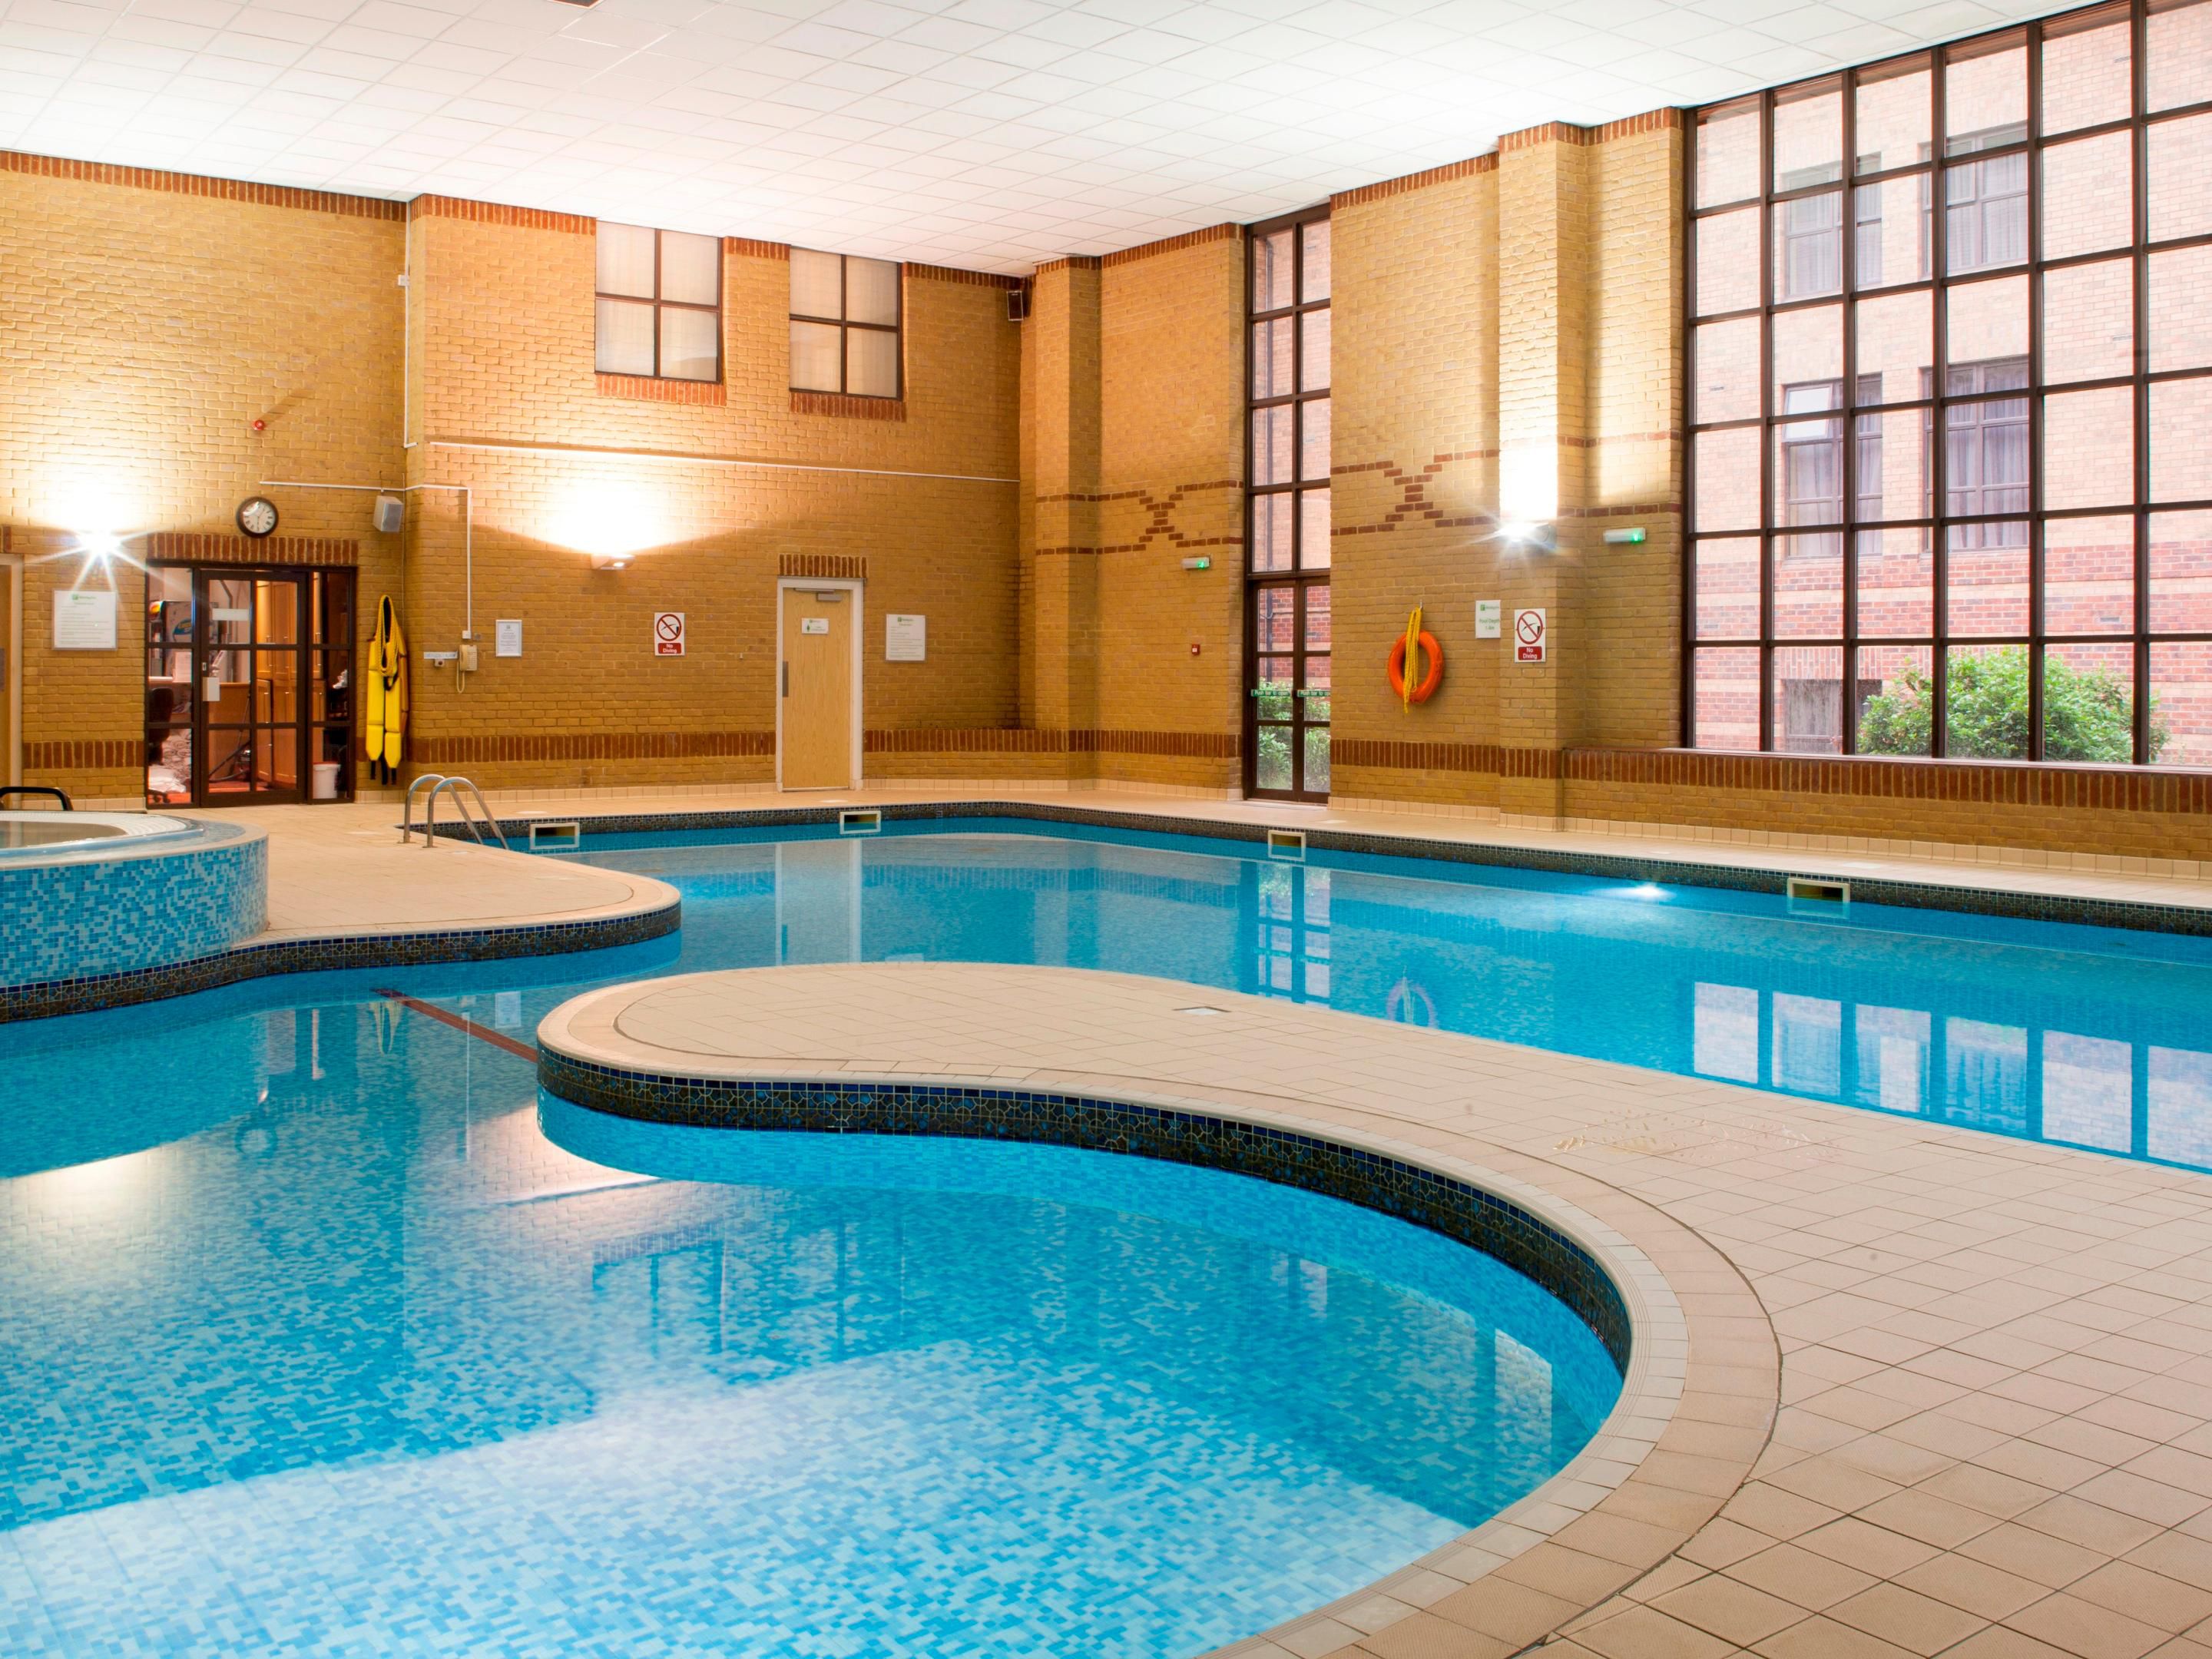 With plenty of facilities available for guests and visitors to our You Fit Health Club, including a 17.5 metre indoor pool, jaccuzi, steam room, sauna, gymnasium, cardiovascular equipment, free weights, power shower, lockers and beauty therapists.